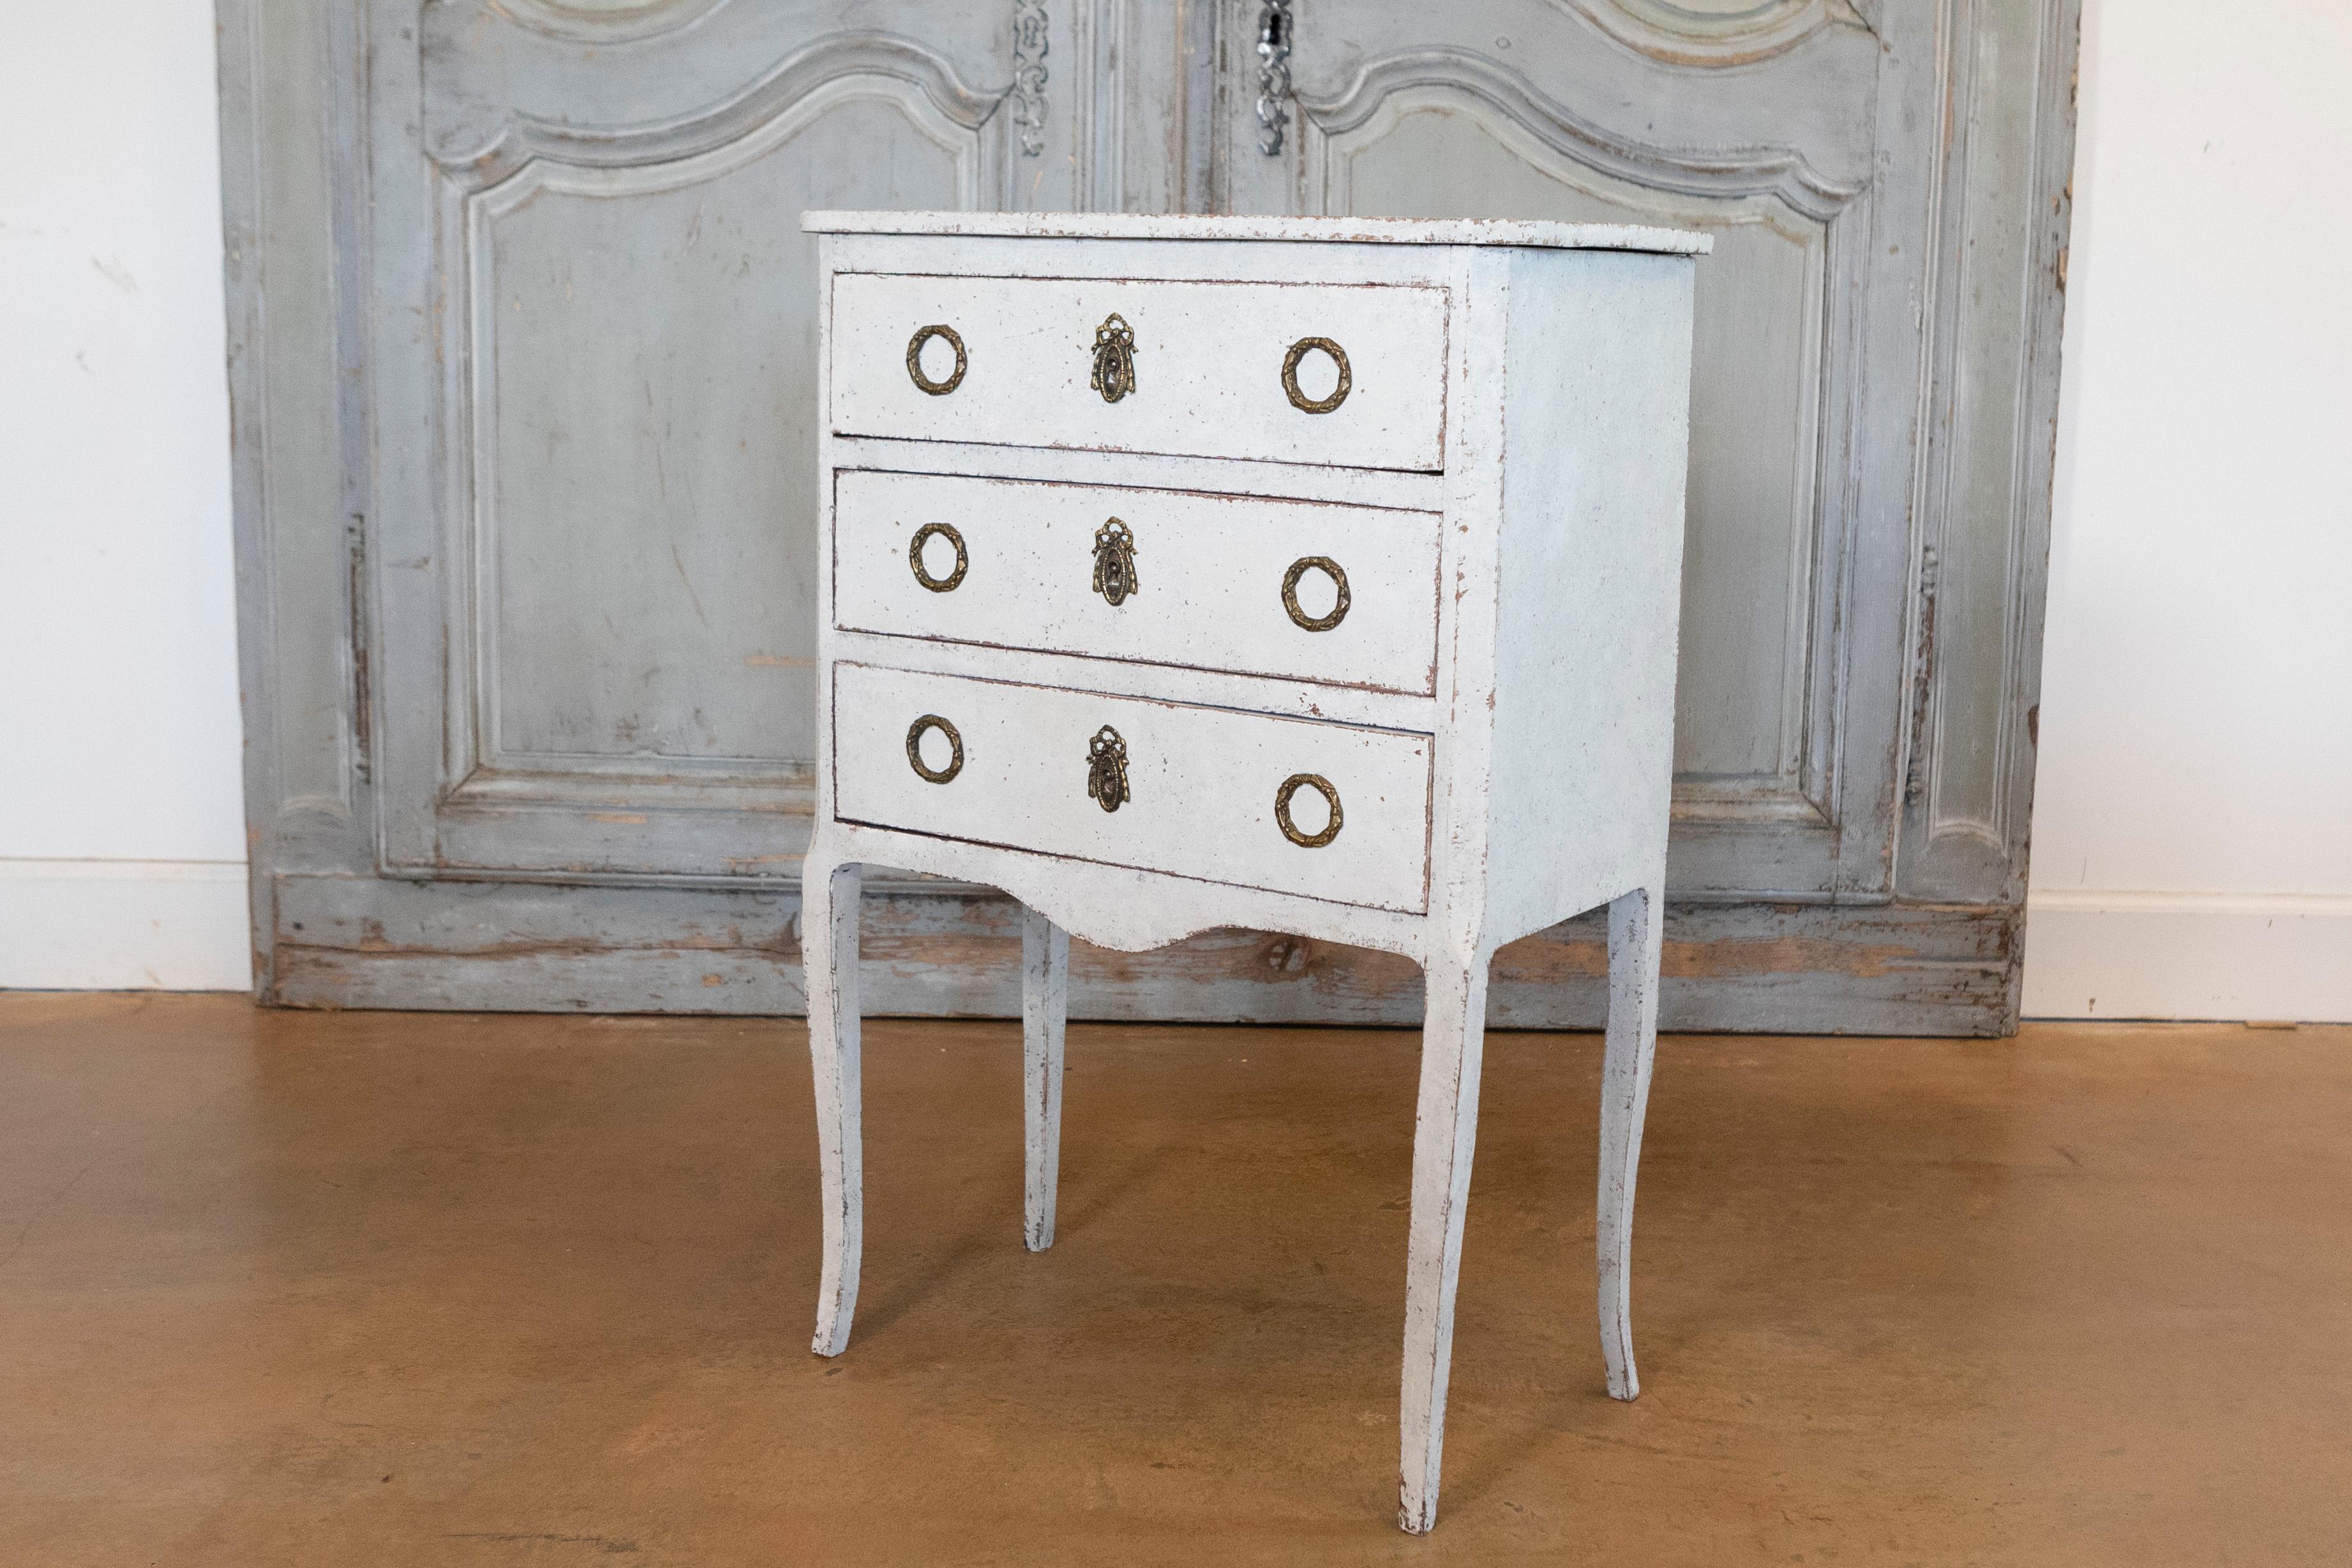 20th Century Swedish Gray Painted Bedside Tables with Three Drawers and Cabriole Legs, a Pair For Sale